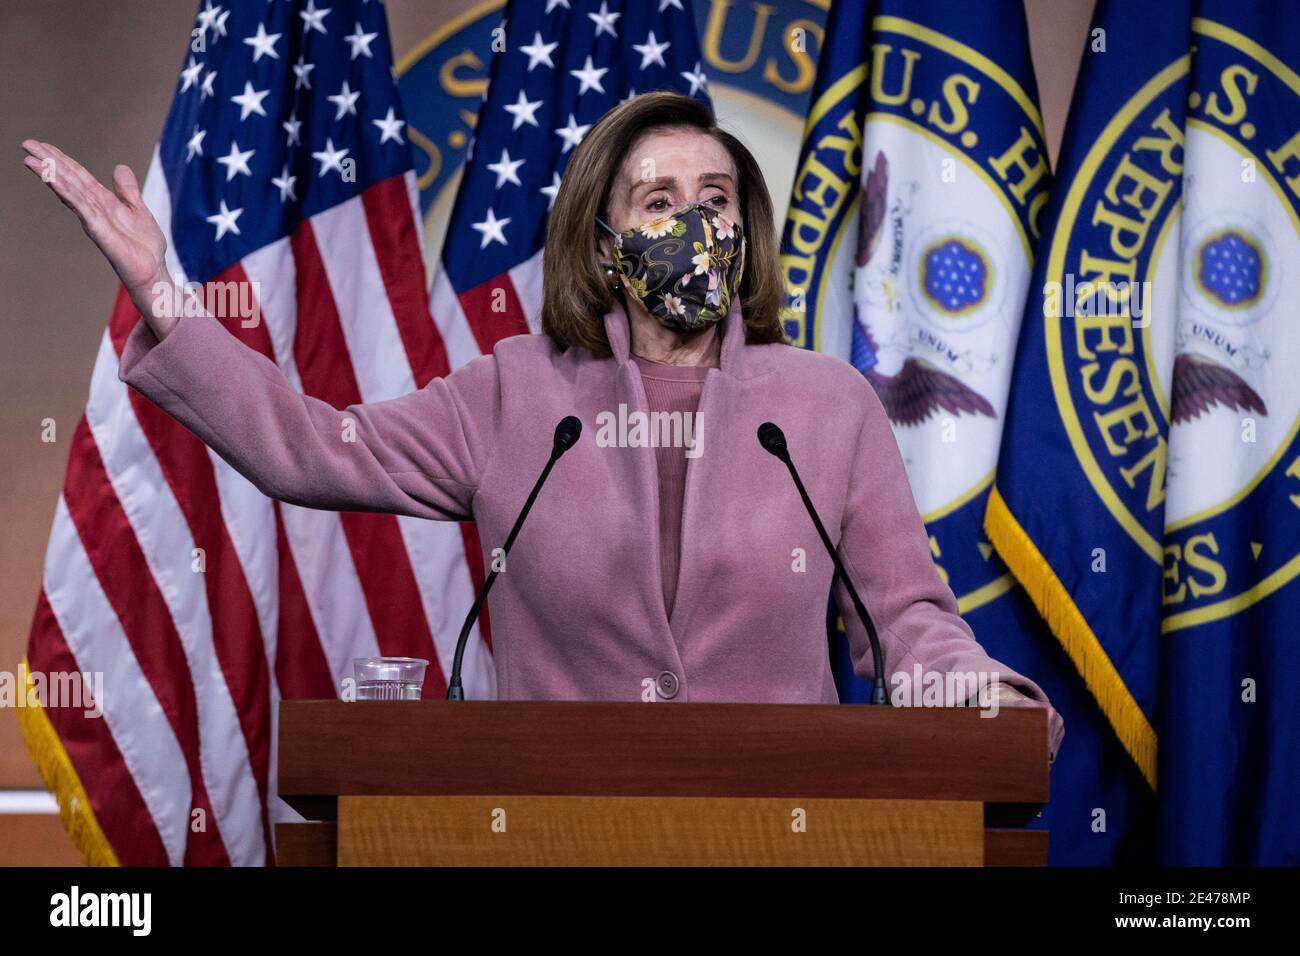 Washington, USA. 21st Jan, 2021. U.S. House Speaker Nancy Pelosi speaks during a press conference on Capitol Hill in Washington, DC, the United States, Jan. 21, 2021. U.S. House Speaker Nancy Pelosi said on Thursday that House committees will work on a new COVID-19 relief package next week. Credit: Ting Shen/Xinhua/Alamy Live News Stock Photo